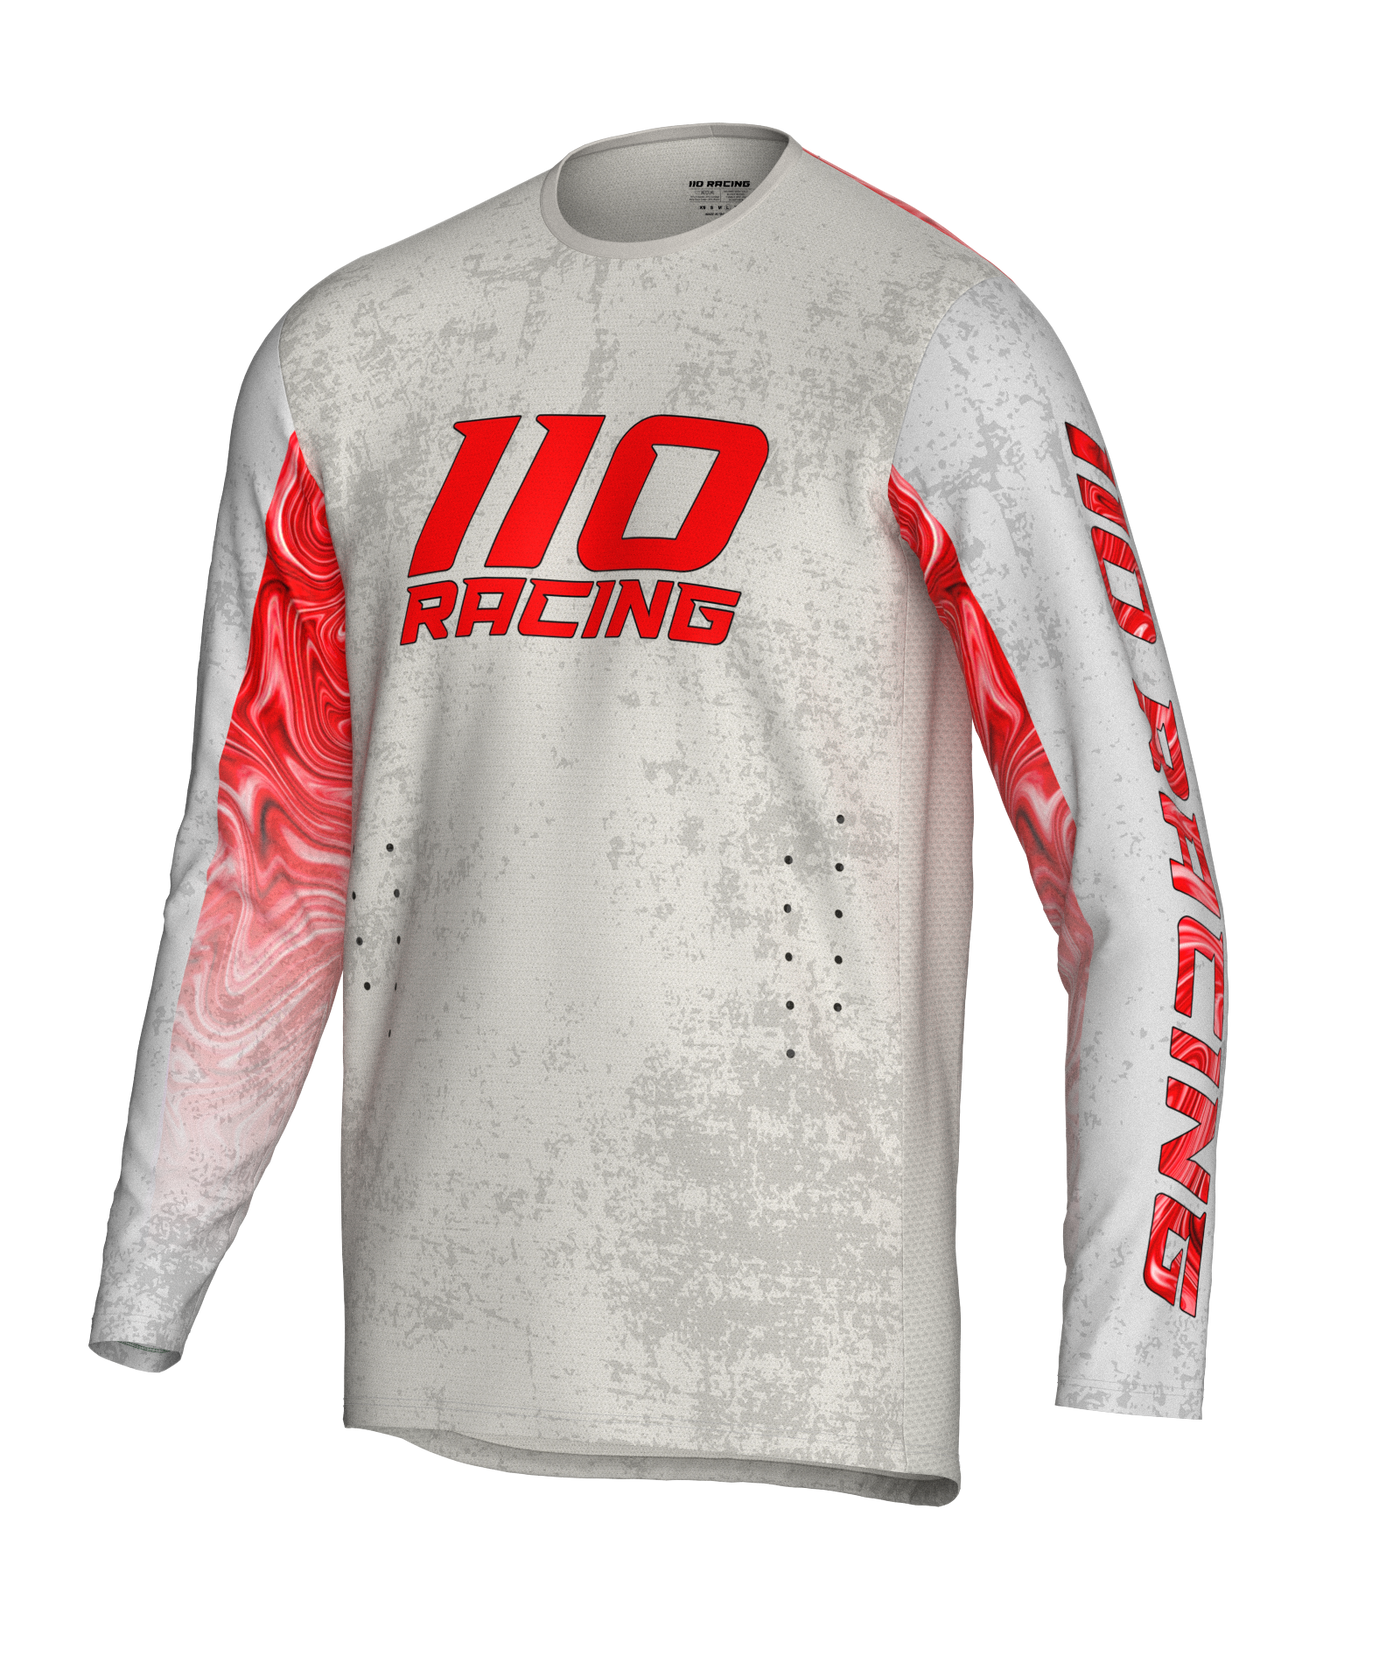 110 RACING // SE23 GRAPHITE GREY/RED YOUTH